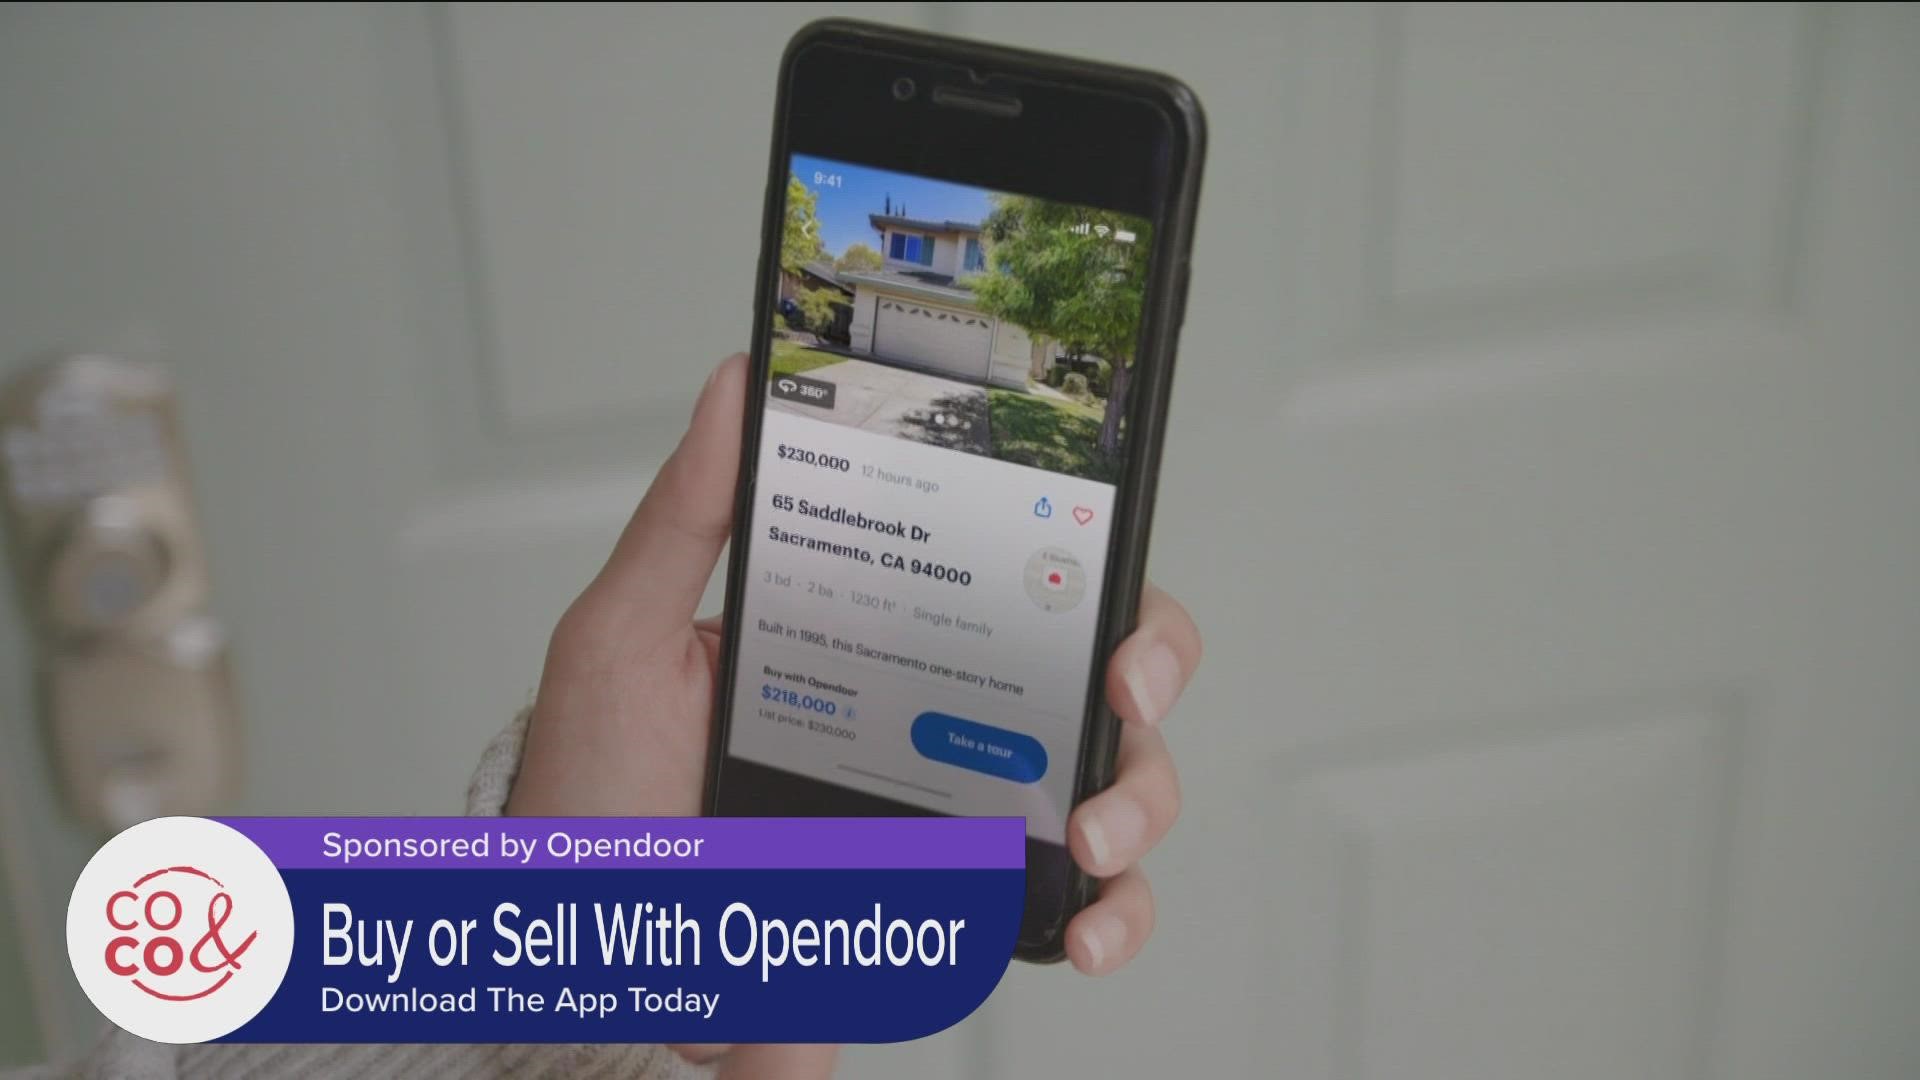 Visit Opendoor.com to request a no-cost, no-obligation offer, or download the app today! **PAID CONTENT**